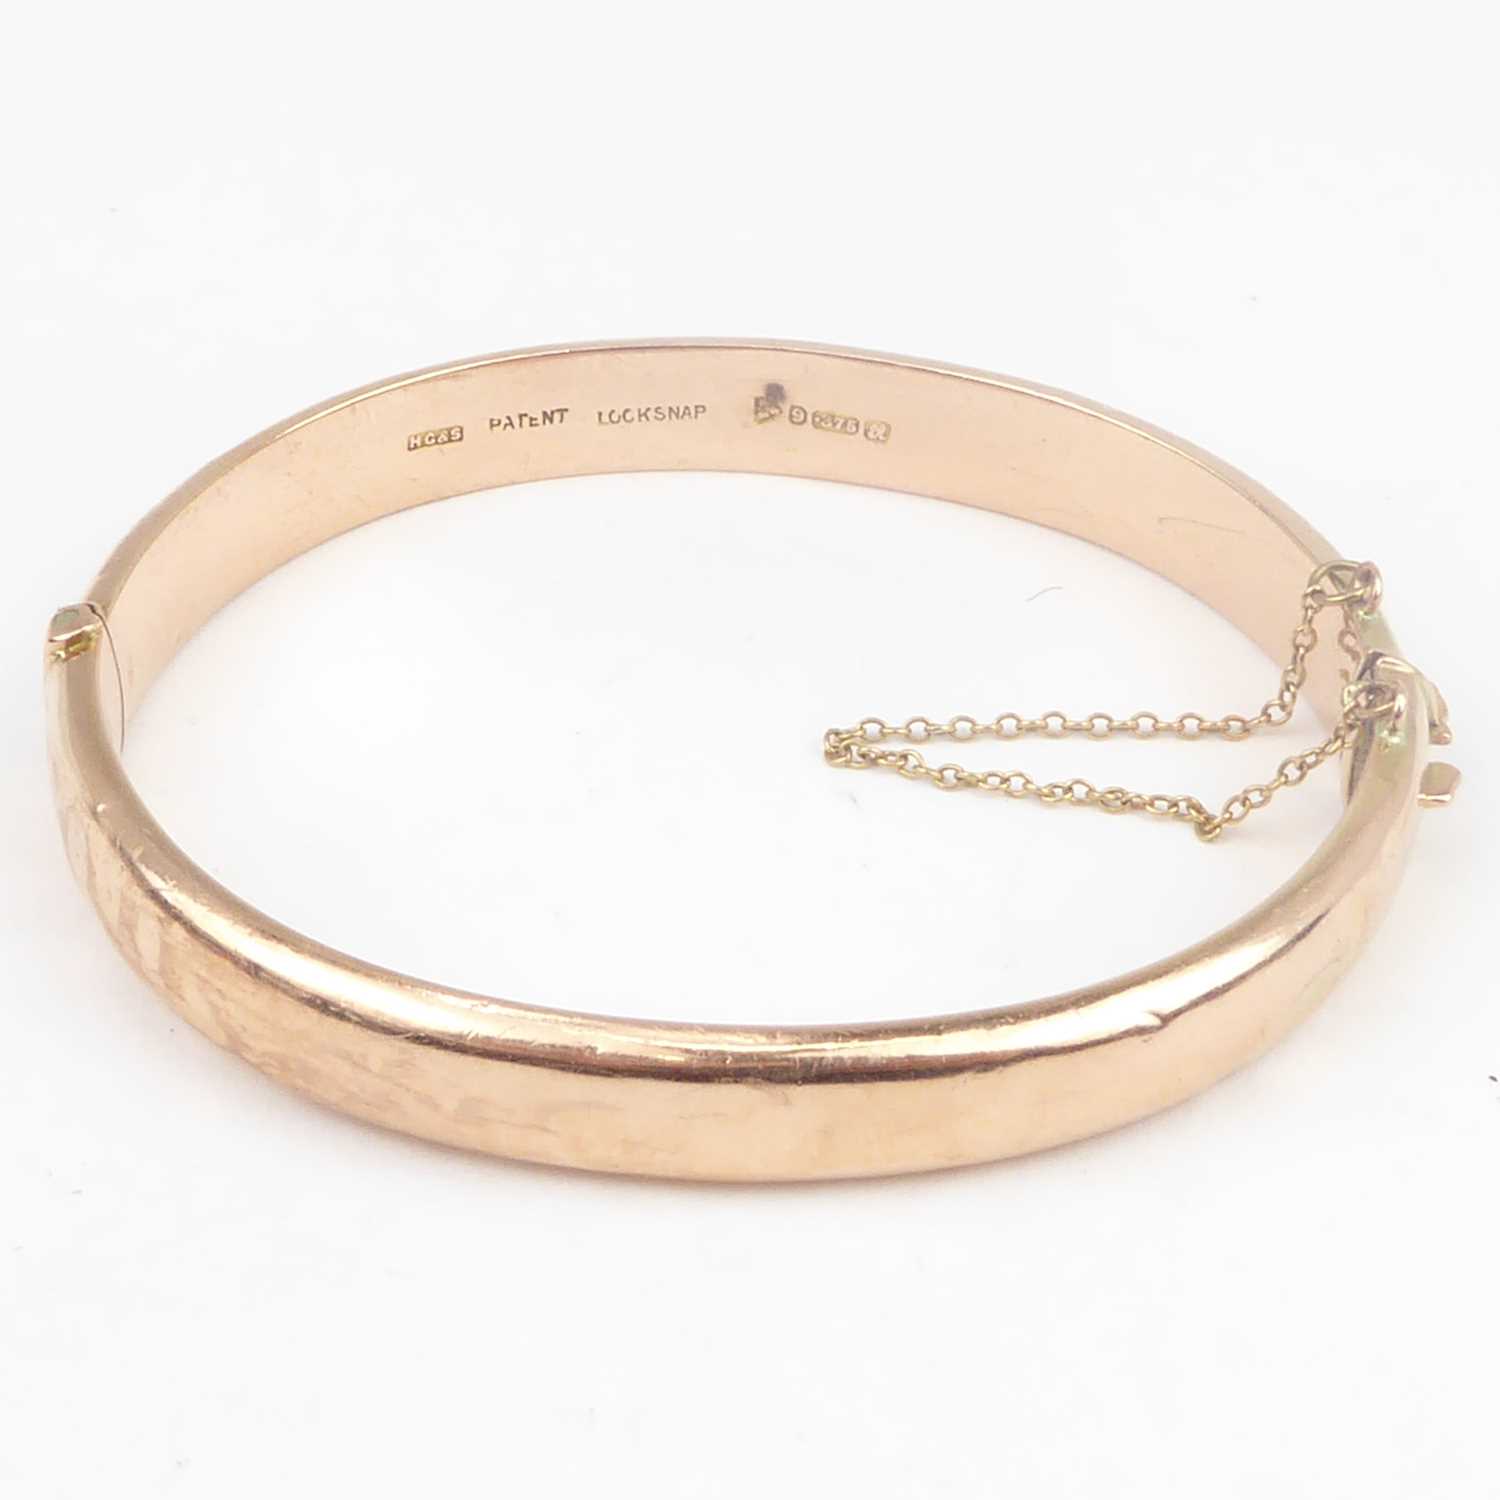 A 9ct rose gold hinged bracelet with safety chain, diameter 6.3cm, approx. 11g. Condition Report: